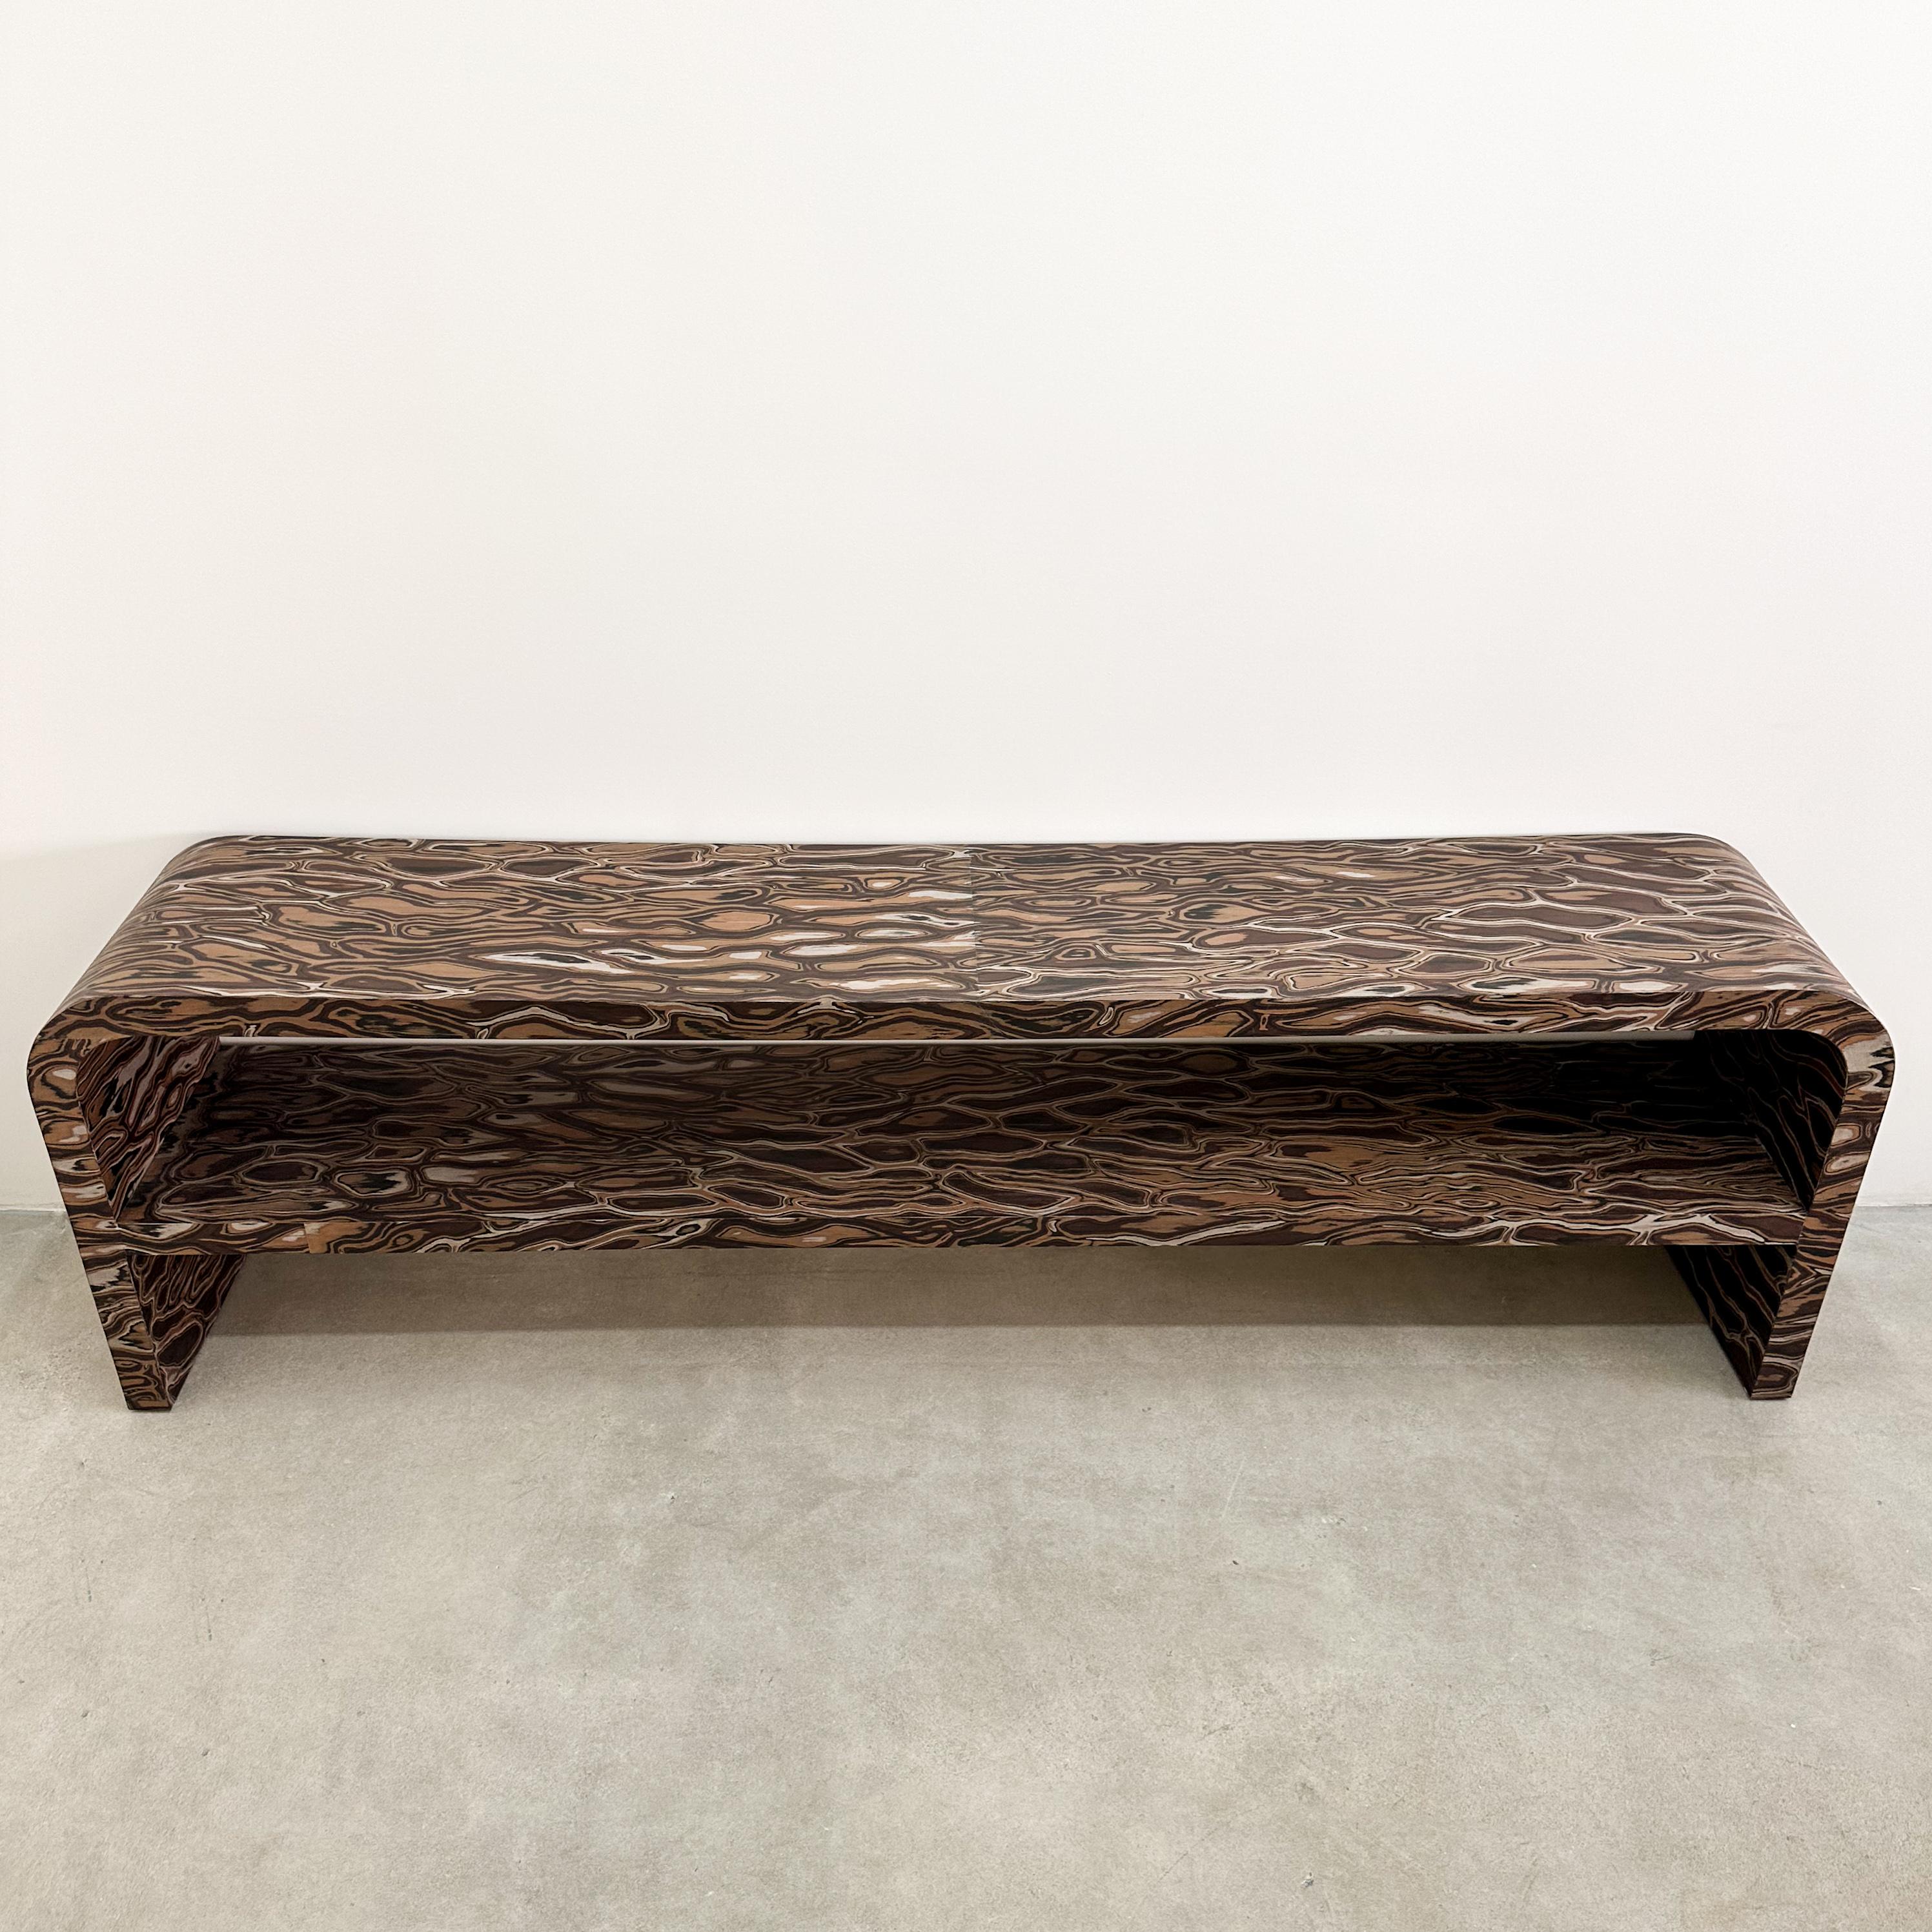 Unknown Vintage Console With Kengo Kuma Veneer MCM 70s 80s Postmodern Retro For Sale